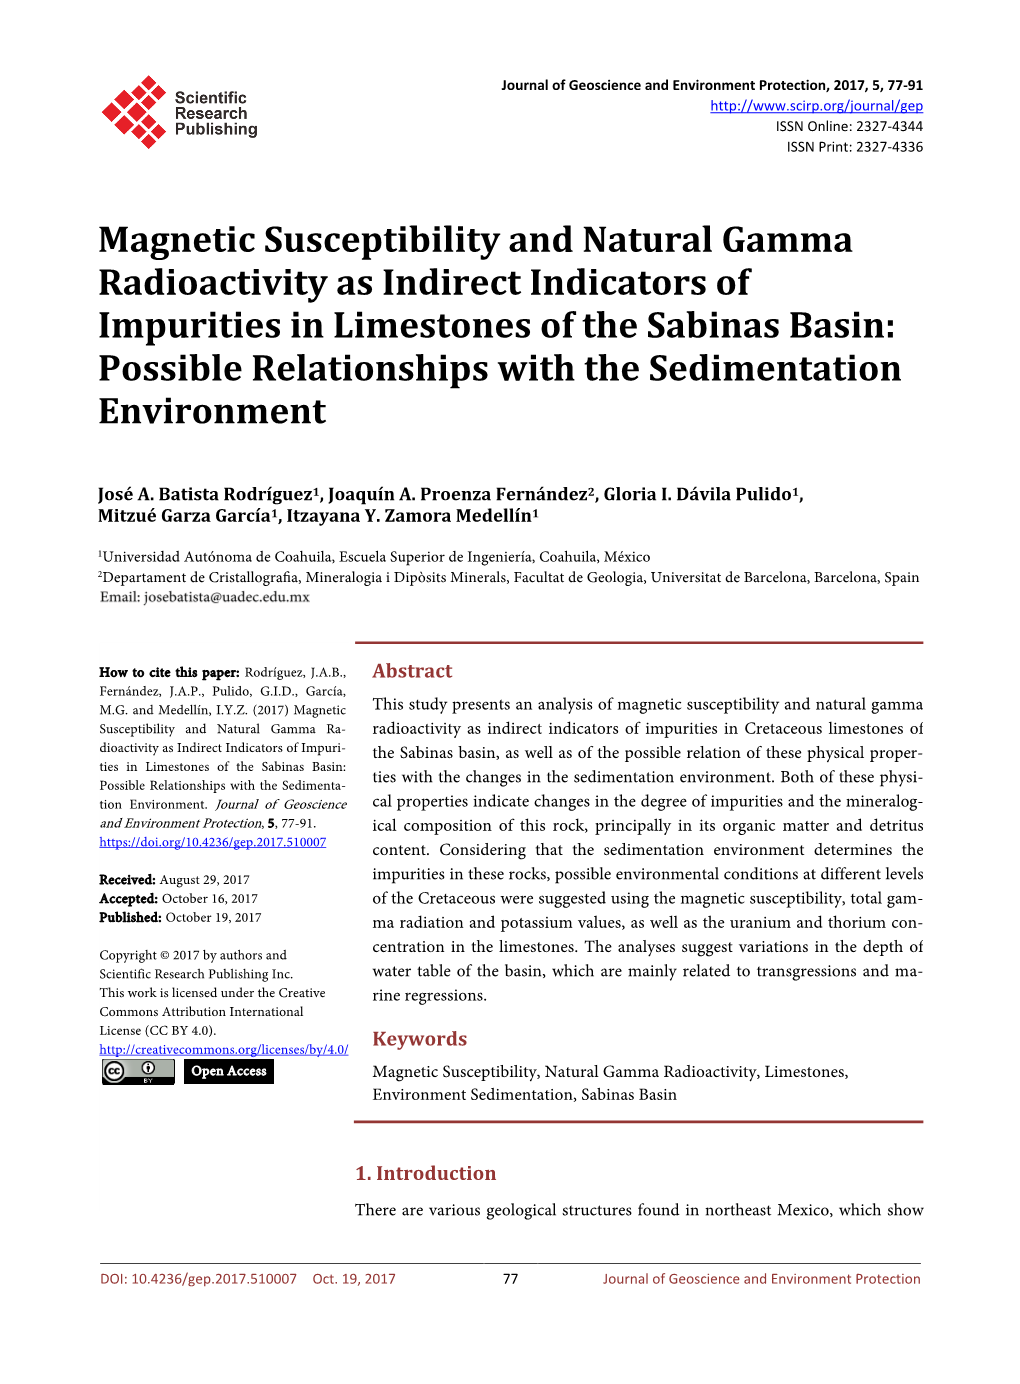 Magnetic Susceptibility and Natural Gamma